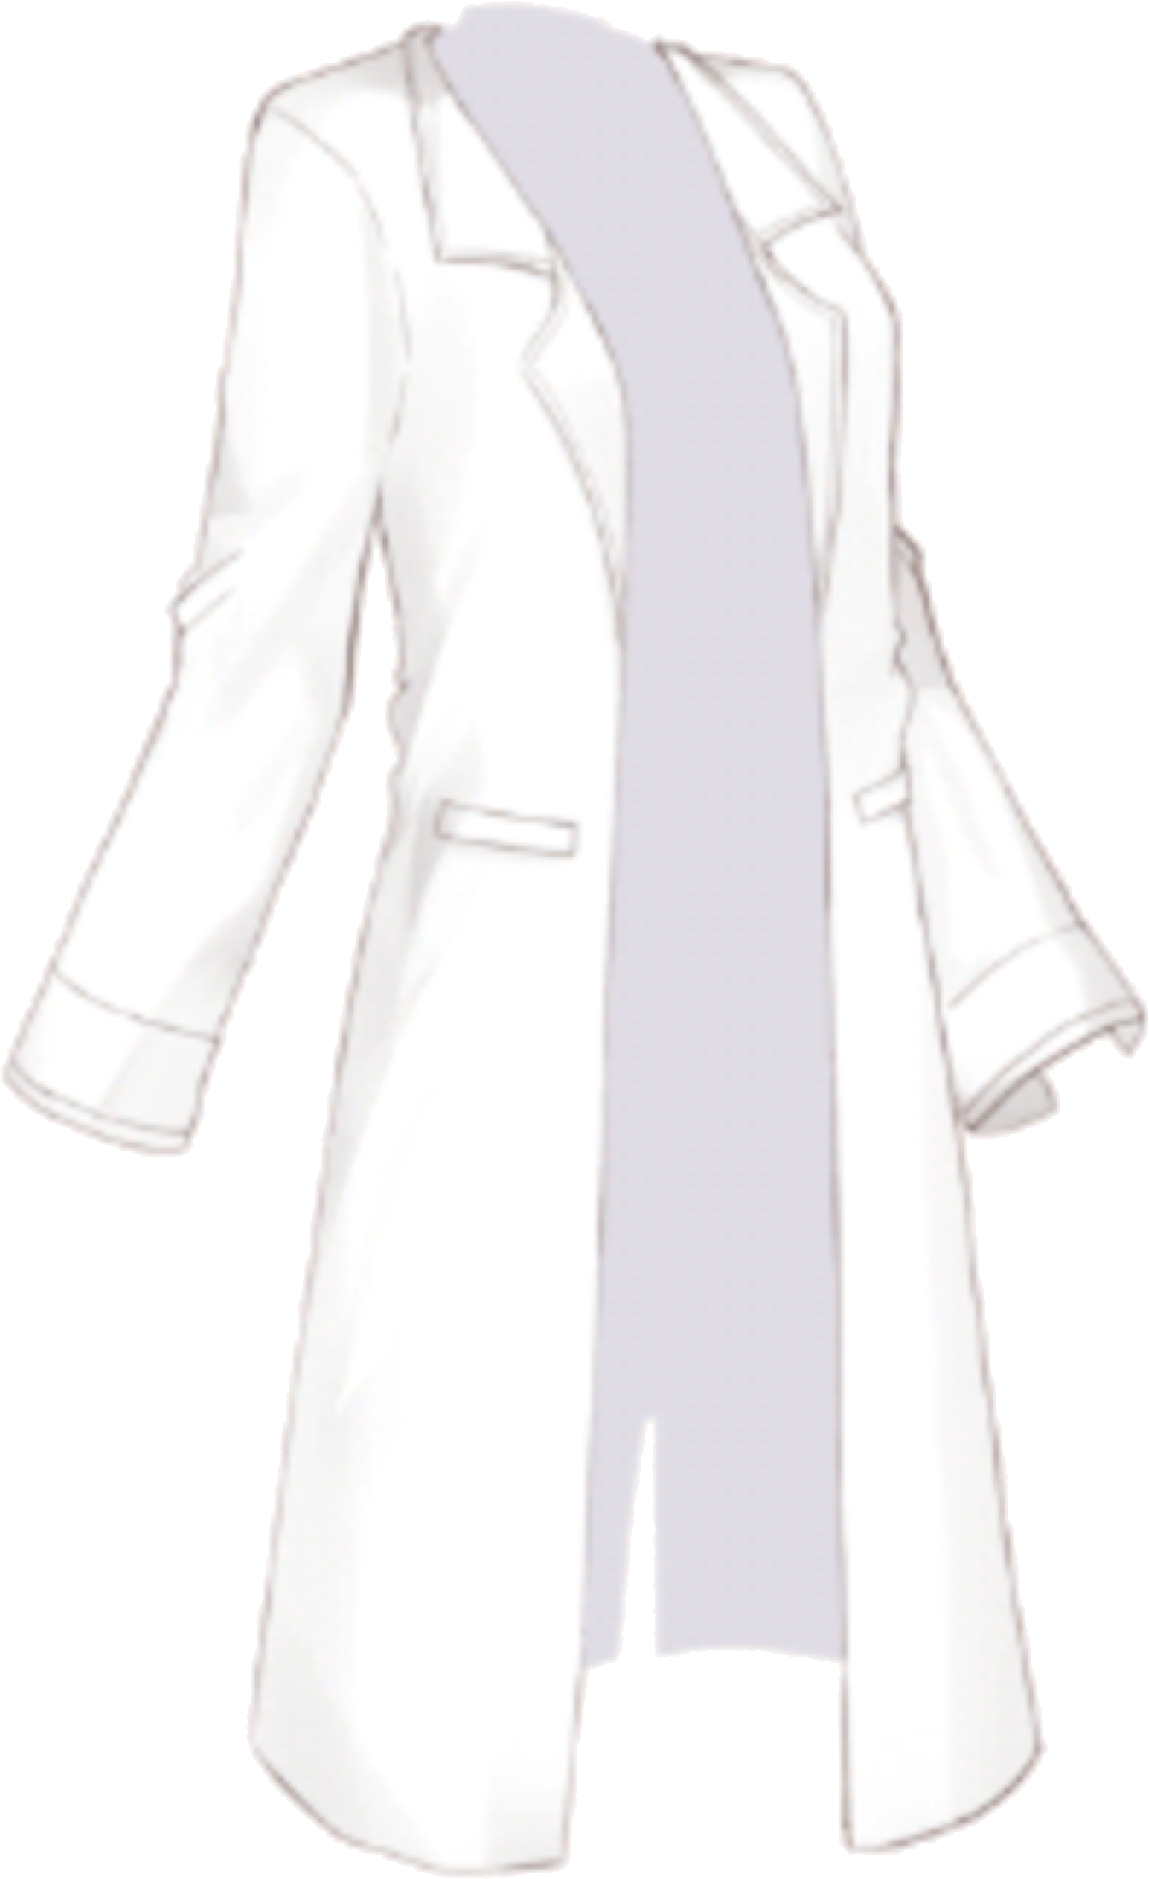 A White Coat With A Grey Dress